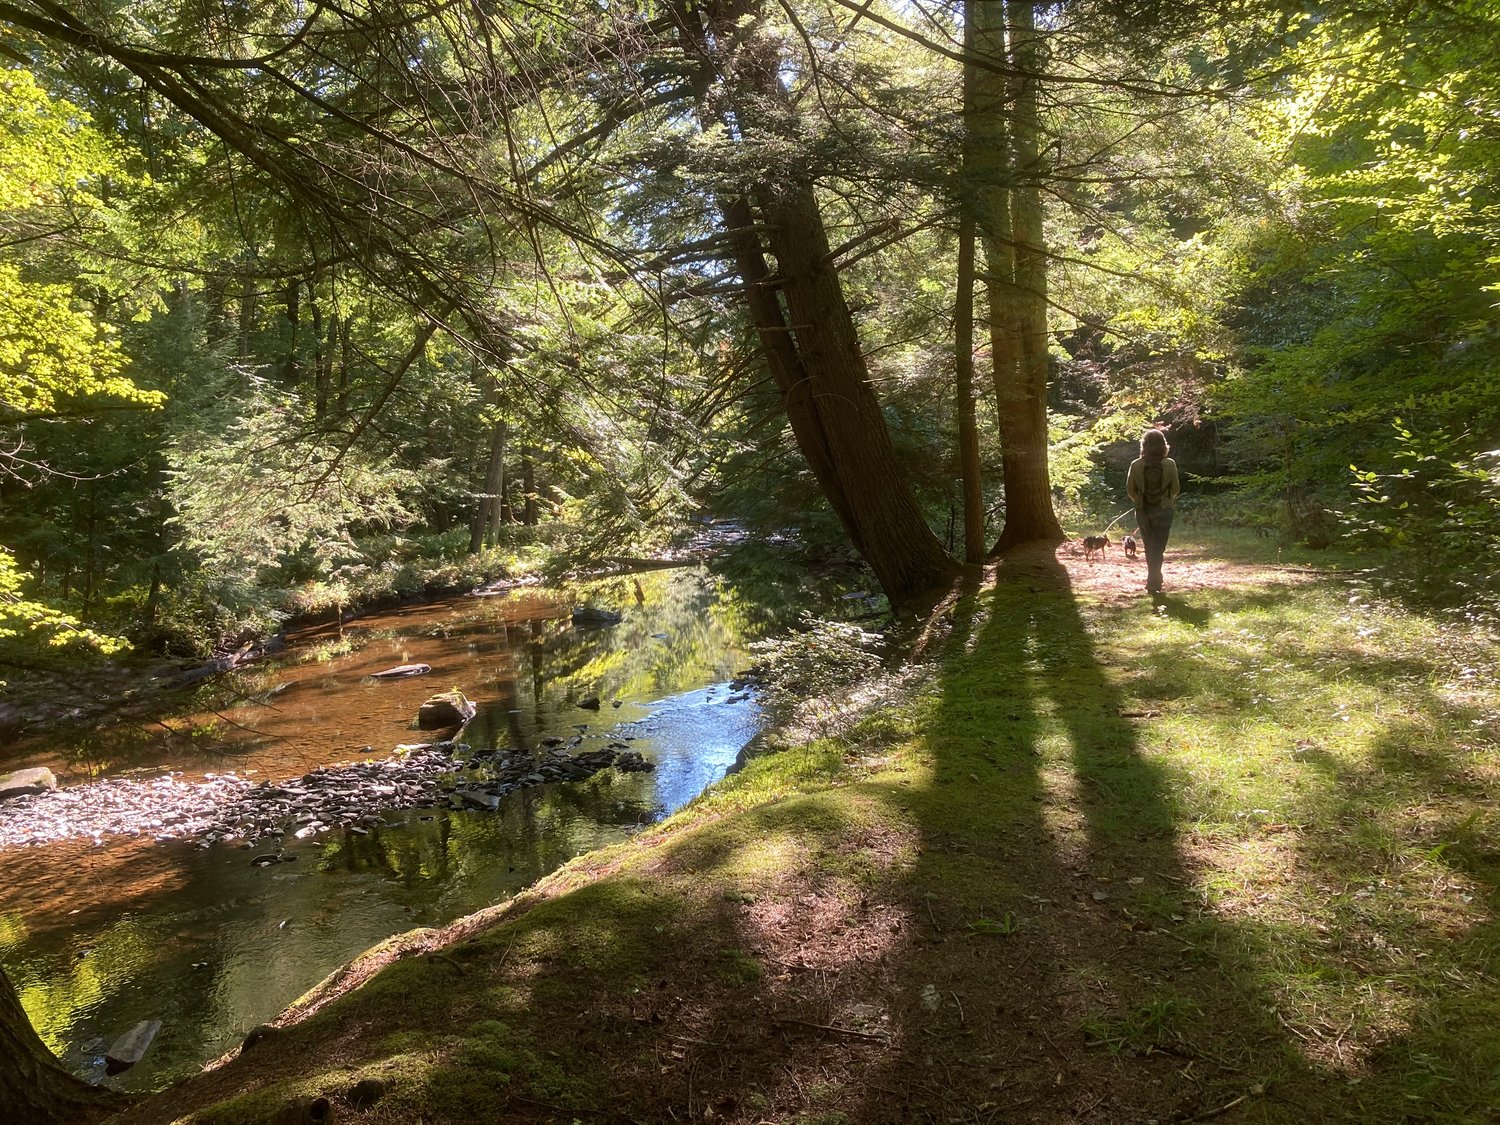 The simple act of taking a walk through the forest or along a sparkling waterway like this one in Pike County, PA can reduce anxiety and restore a sense of peace and perspective. Take a dog along and be inspired by its highly engaged sensory appreciation of the experience.